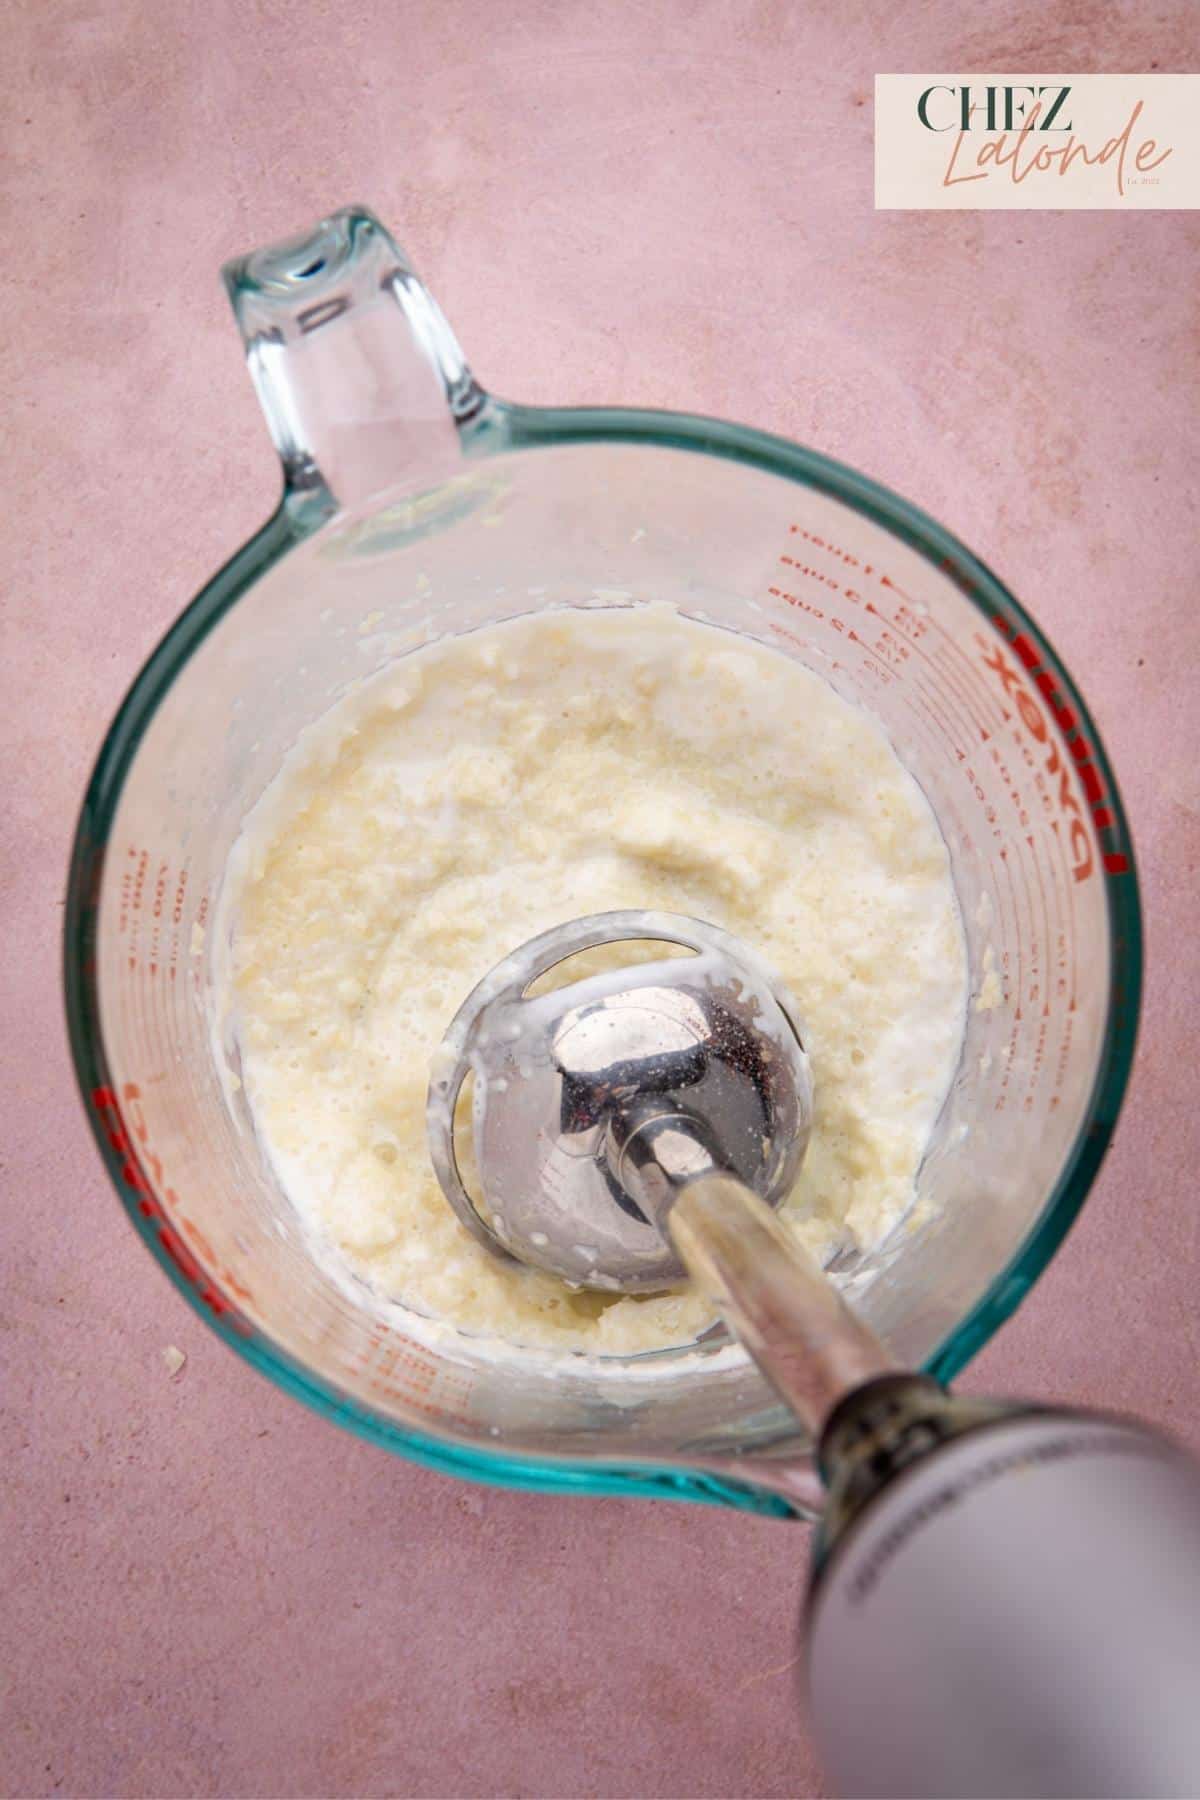 Use the immersion blender to blend and combine the ingredients until they form a thick paste.